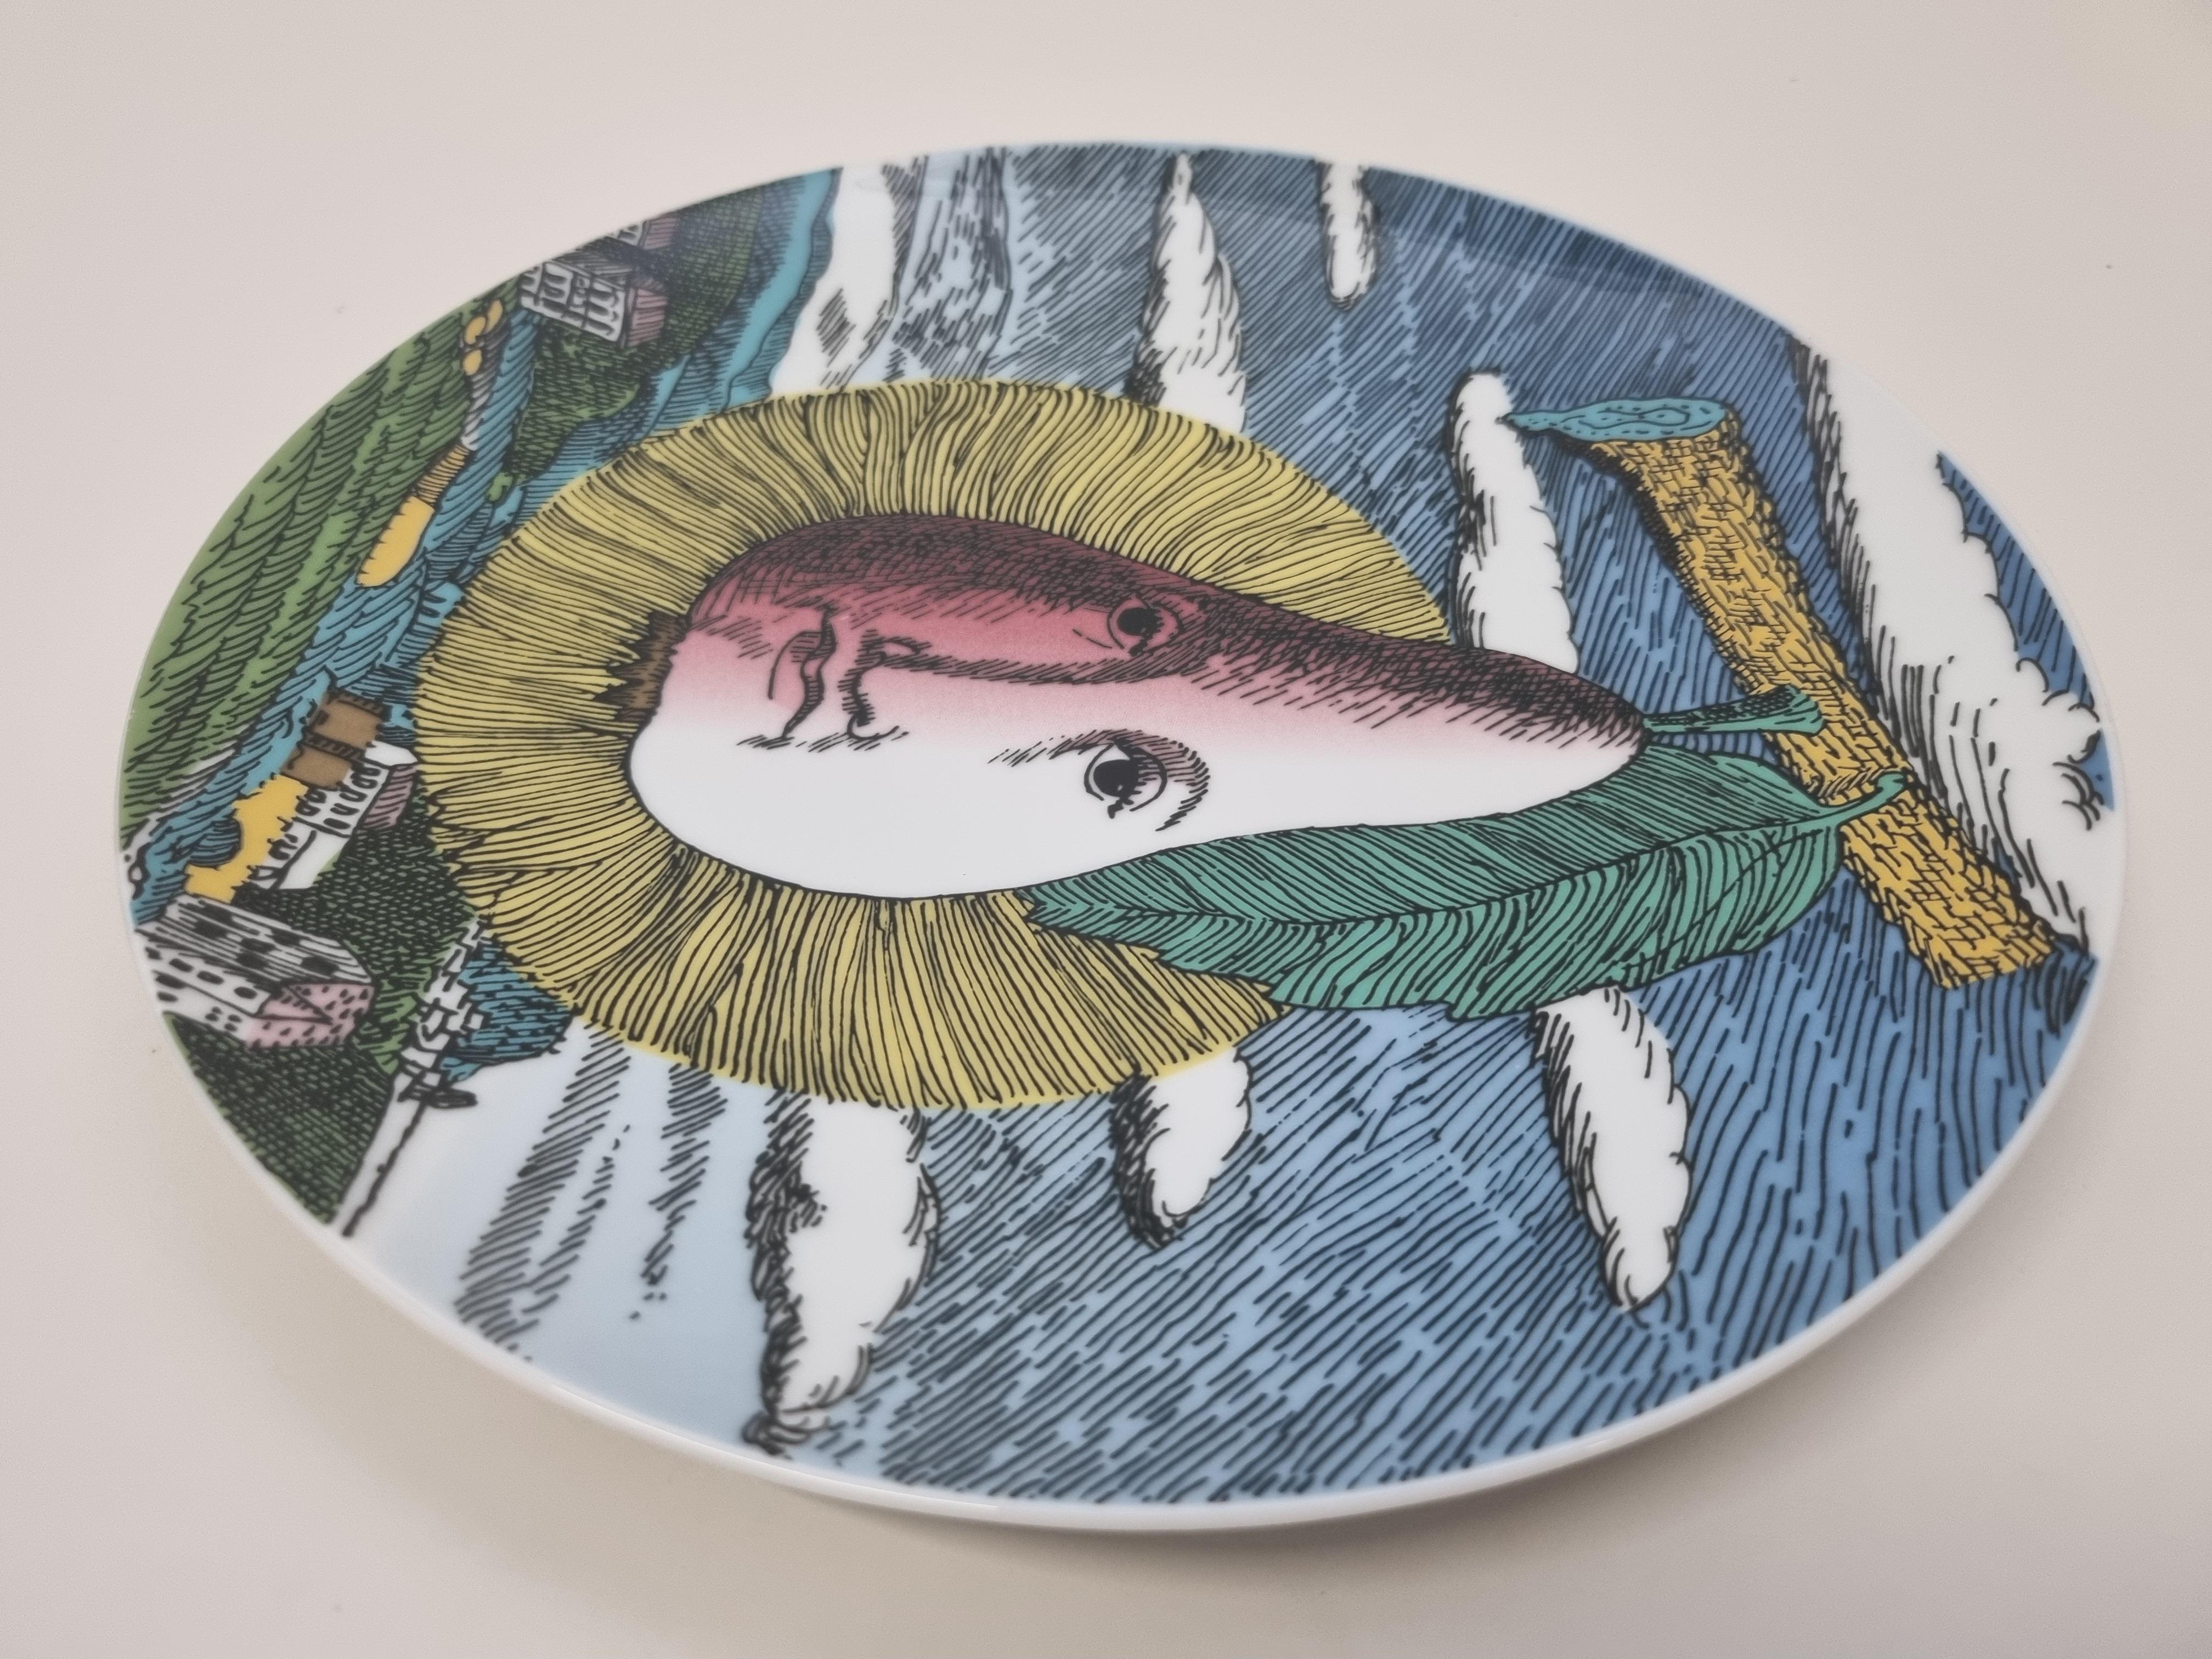 Rosenthal Piero Fornasetti Porcelain Plate 12 Mesi 12 Soli Settembre September In Good Condition For Sale In München, BY